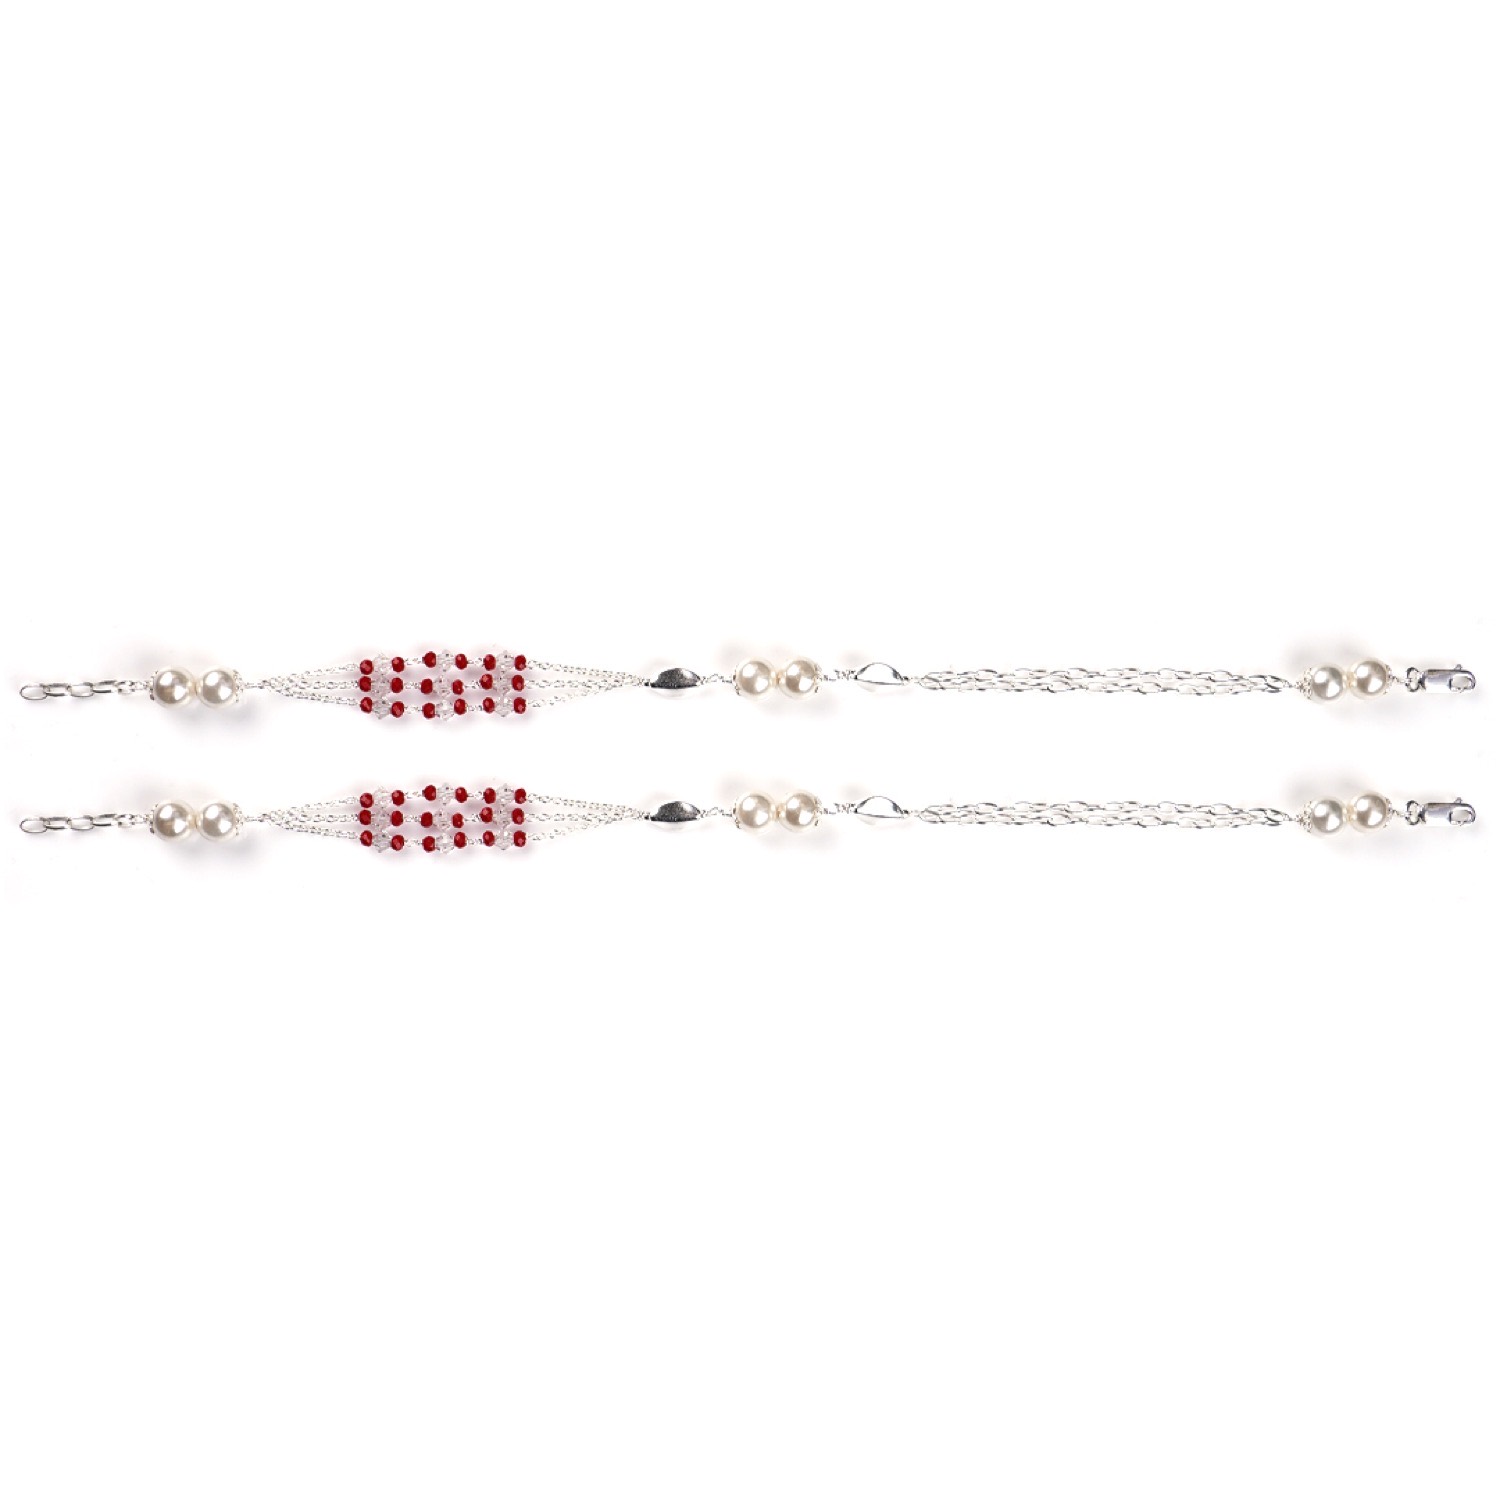 varam_anklets_072022_cherry_red_stone_silver_anklets_010-1